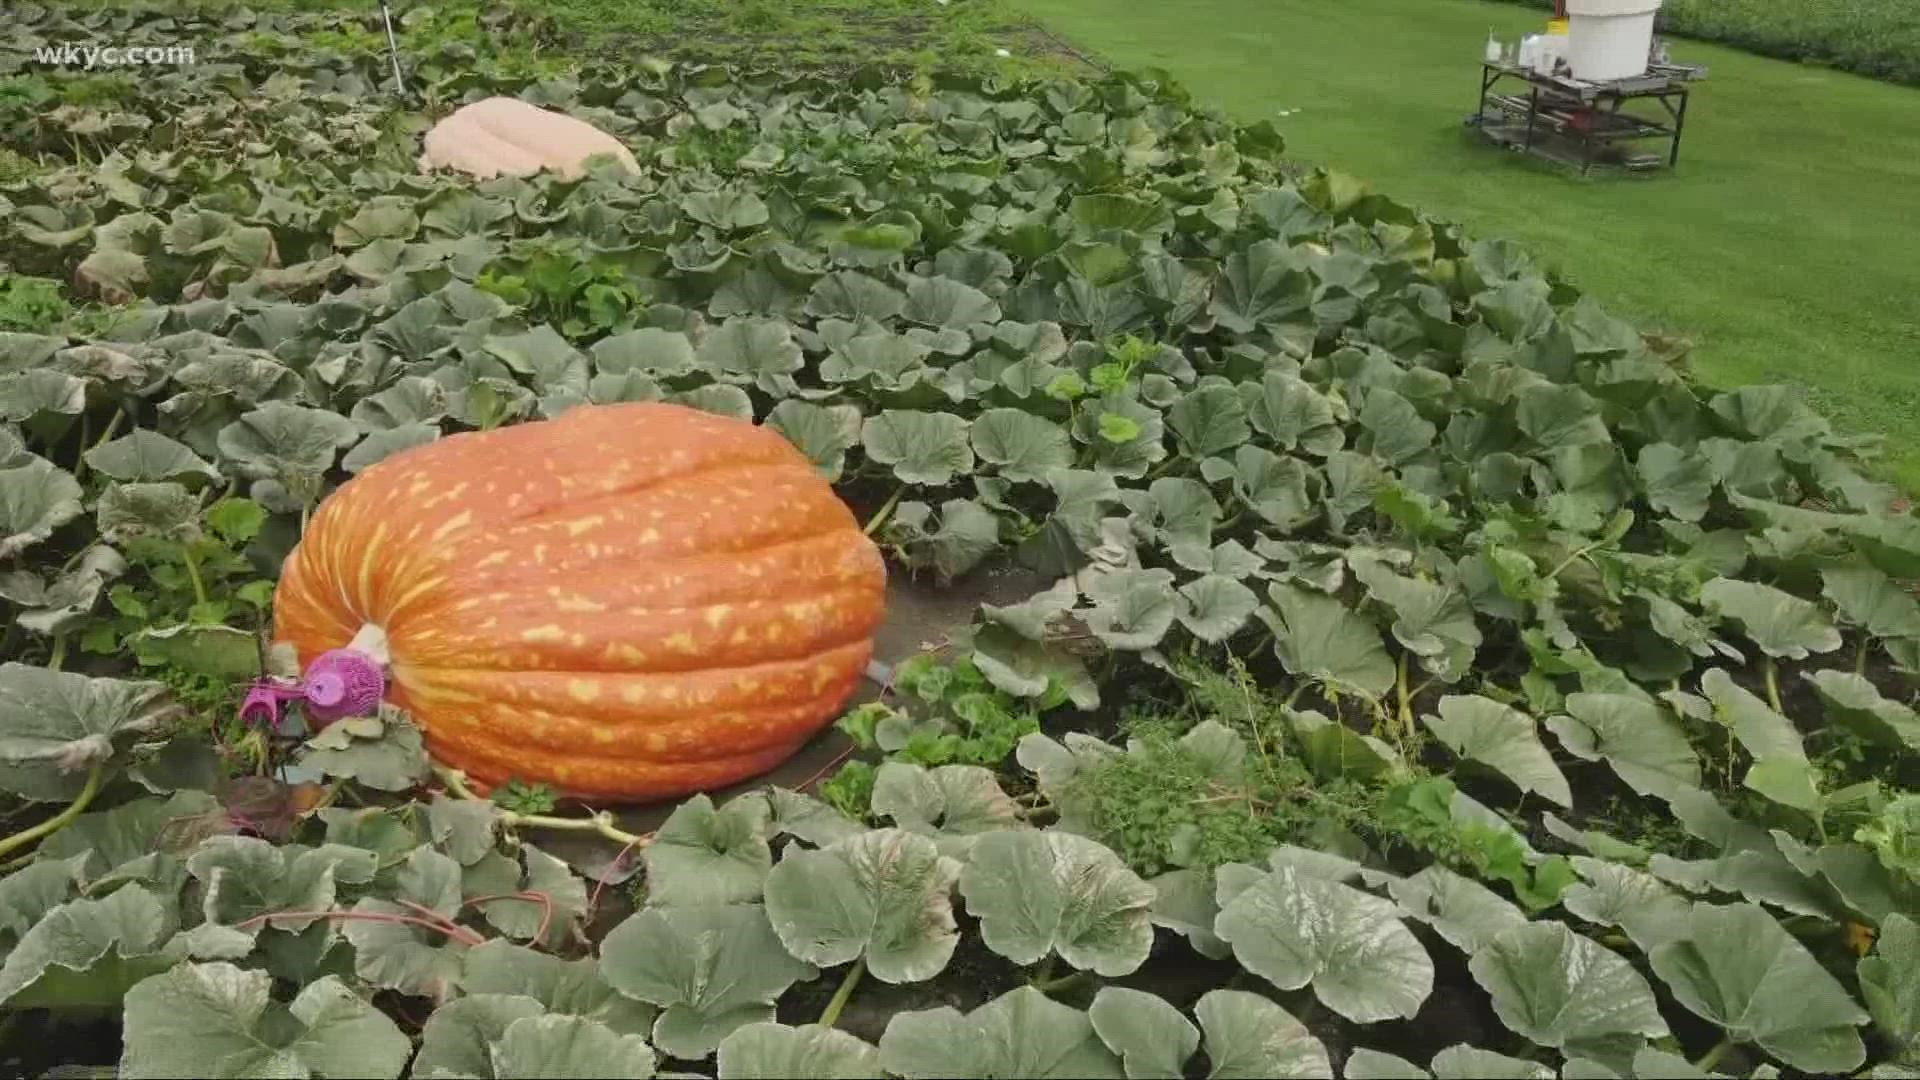 Check out these massive pumpkins!